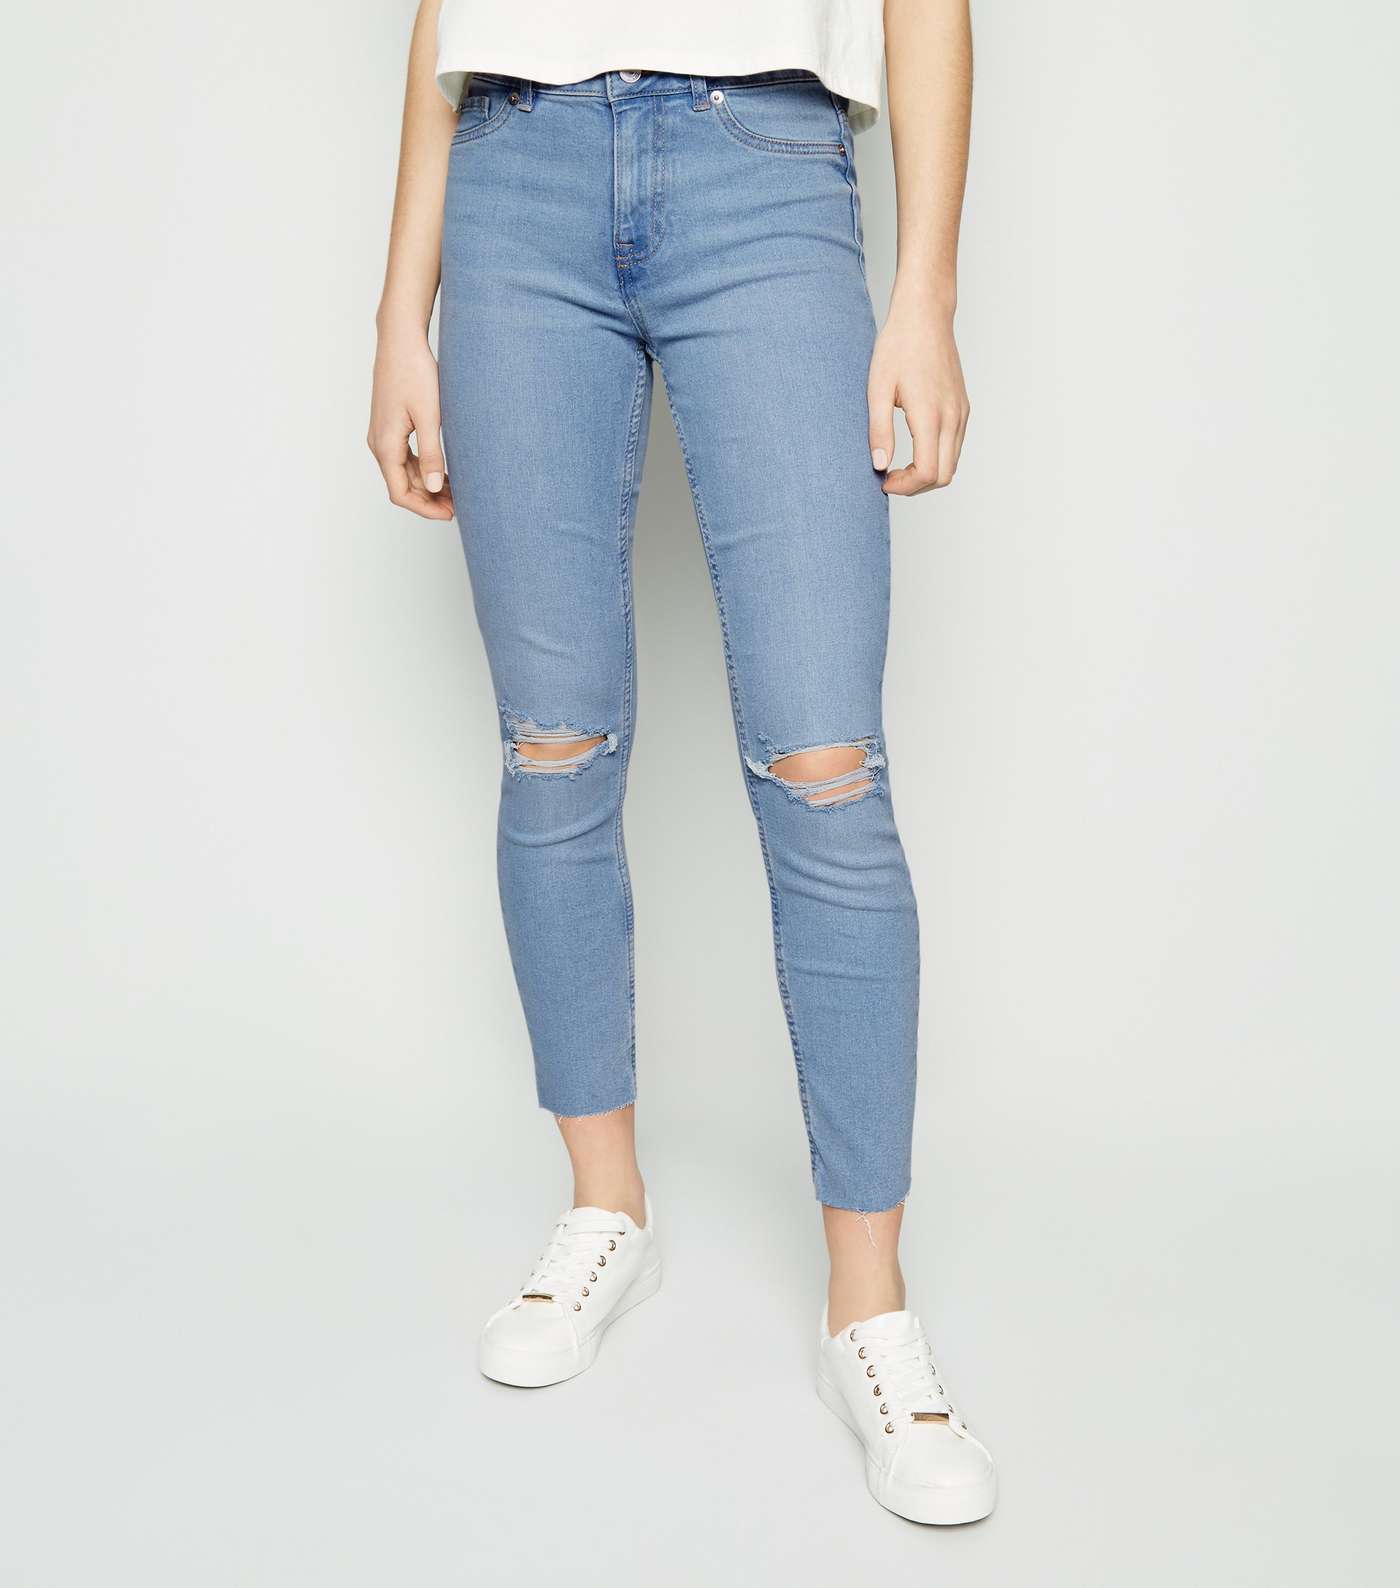 Bright Blue Bleach Wash Ripped Jenna Jeans Image 2